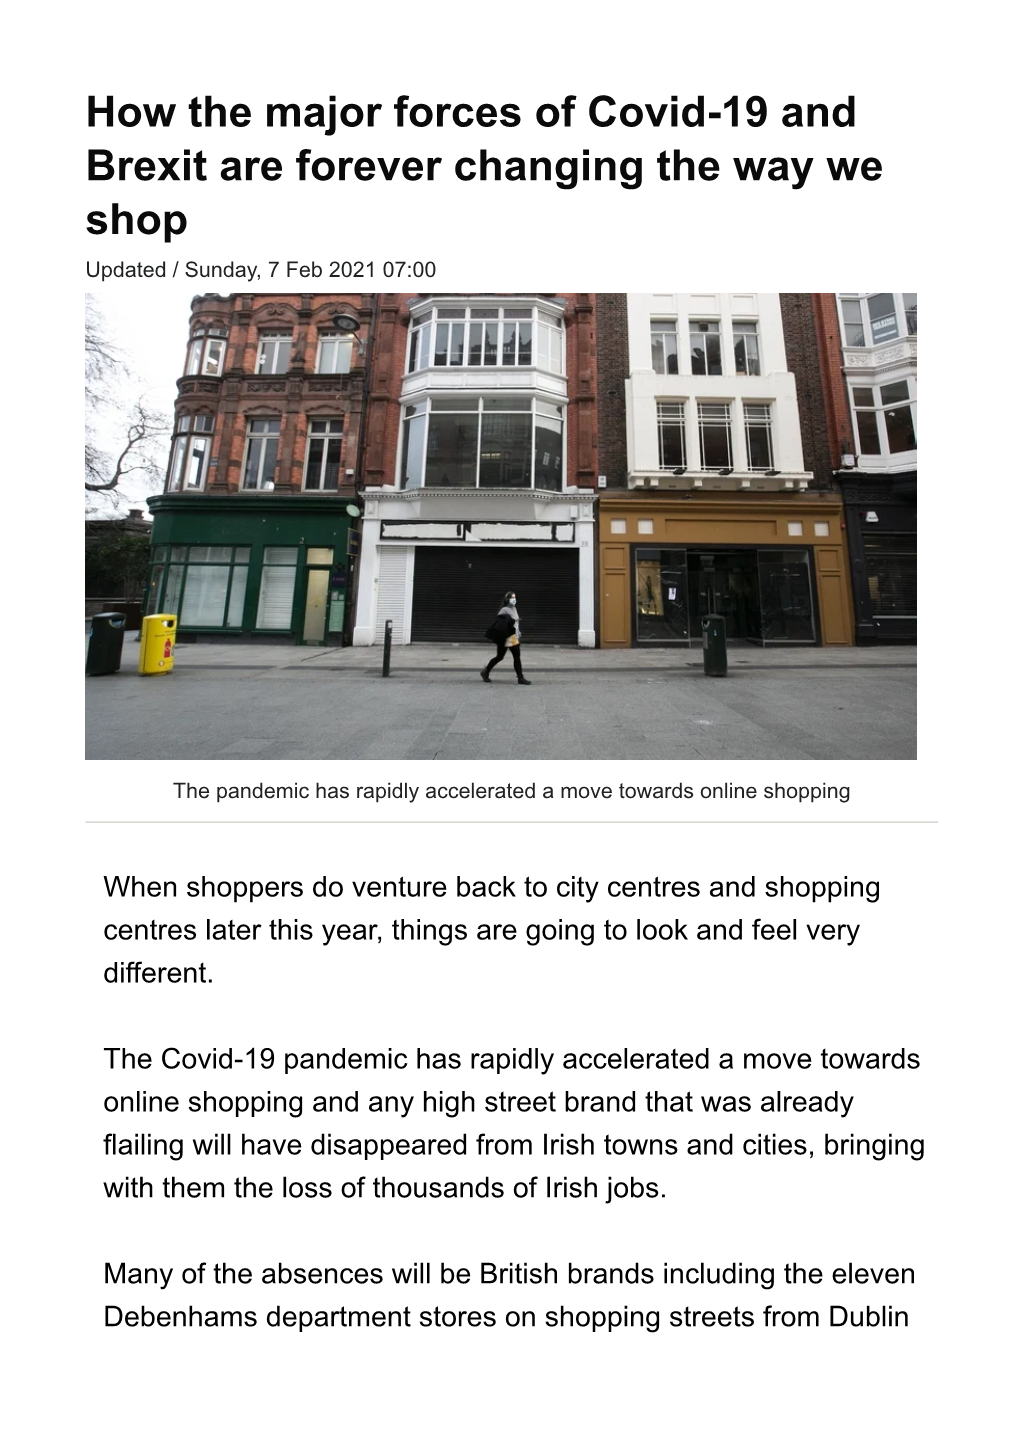 How the Major Forces of Covid-19 and Brexit Are Forever Changing the Way We Shop Updated / Sunday, 7 Feb 2021 07:00